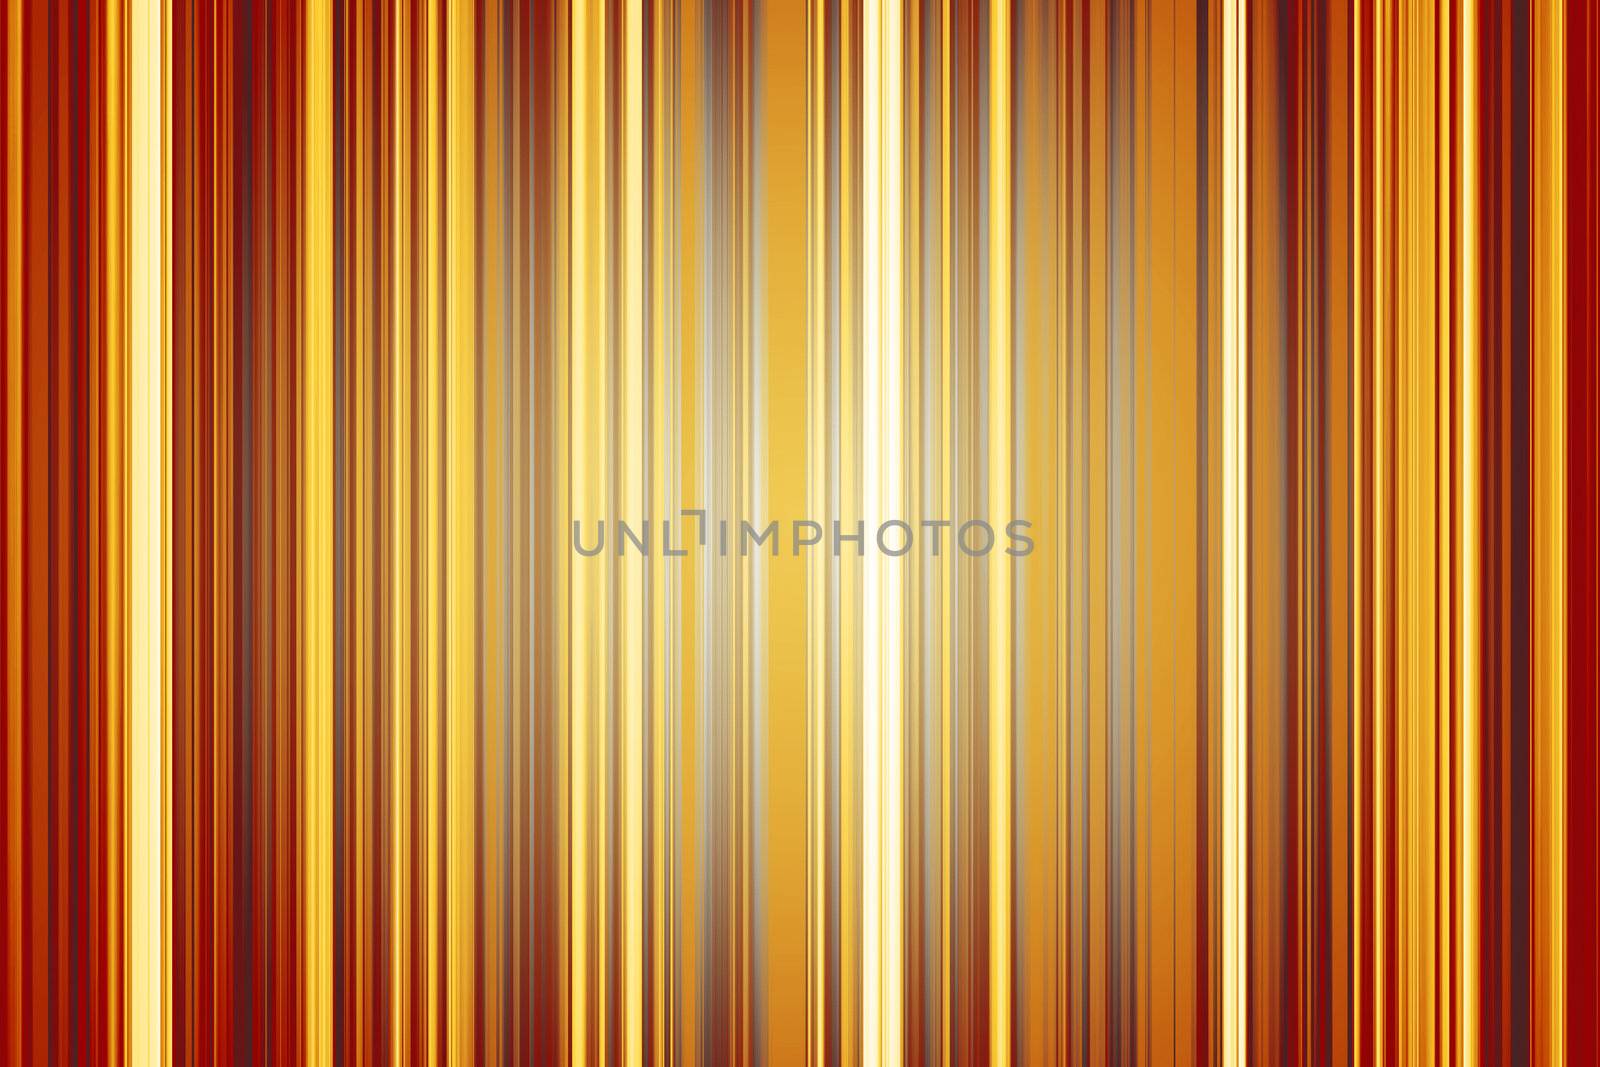 An image of a nice abstract stripes background